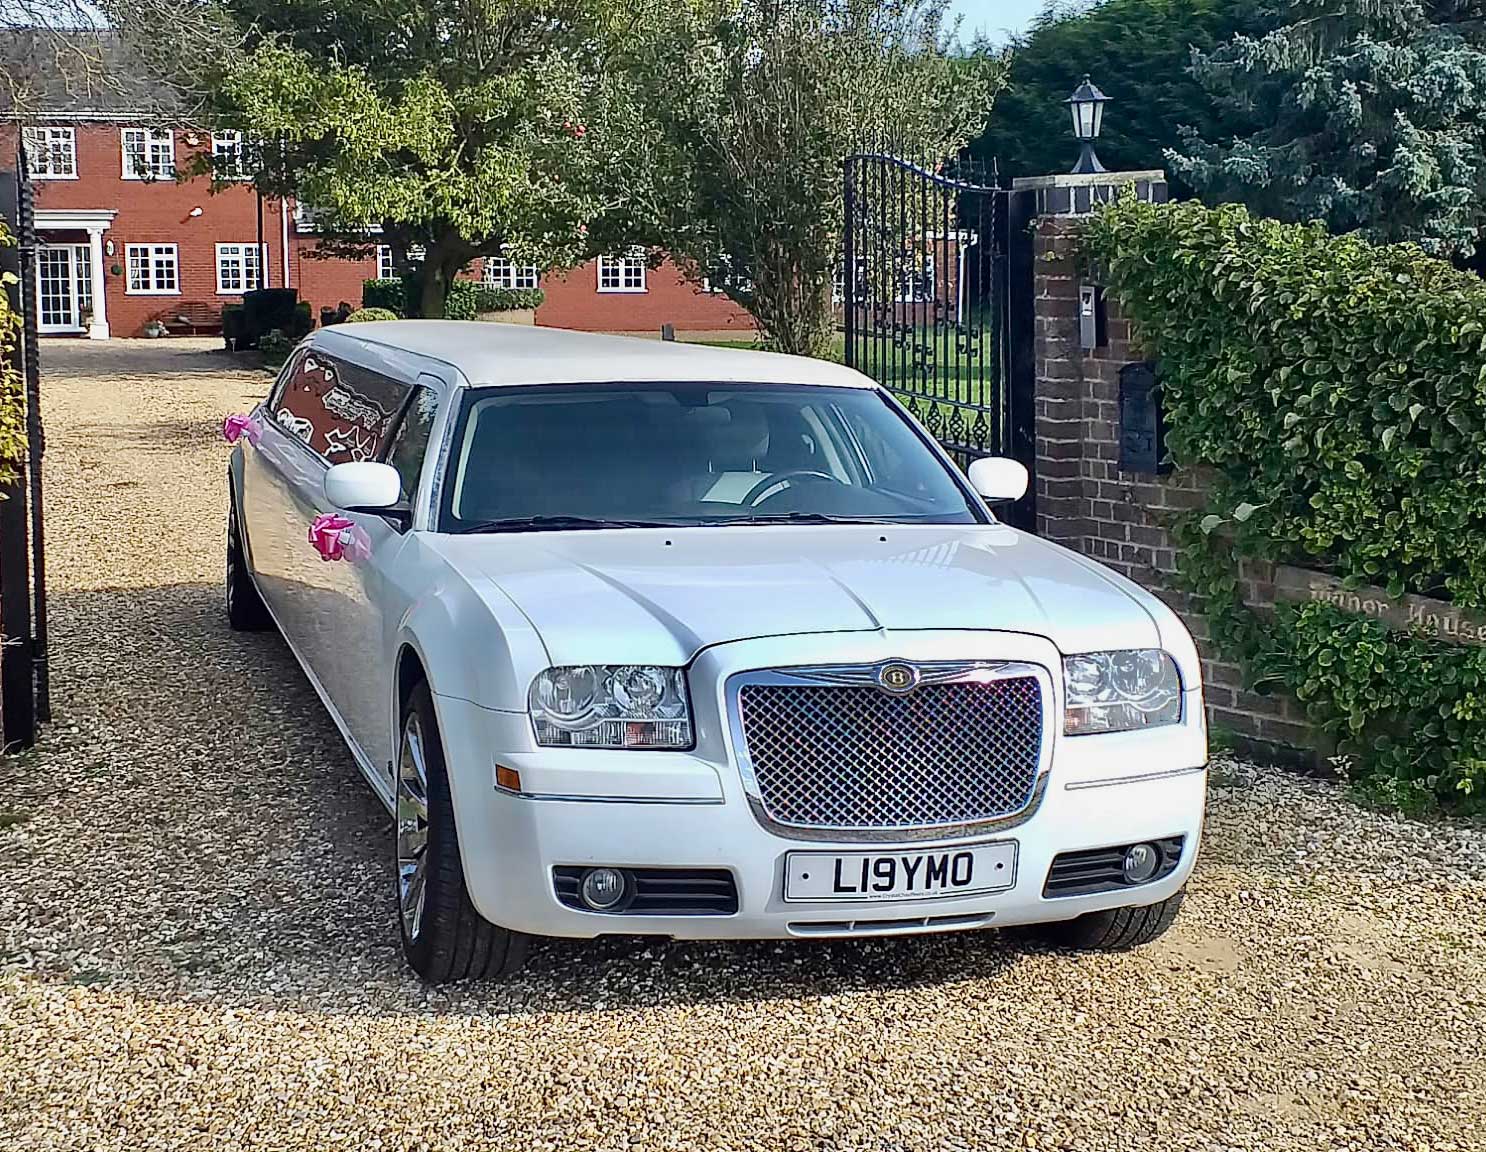 Wedding Limo Hire In Wisbech